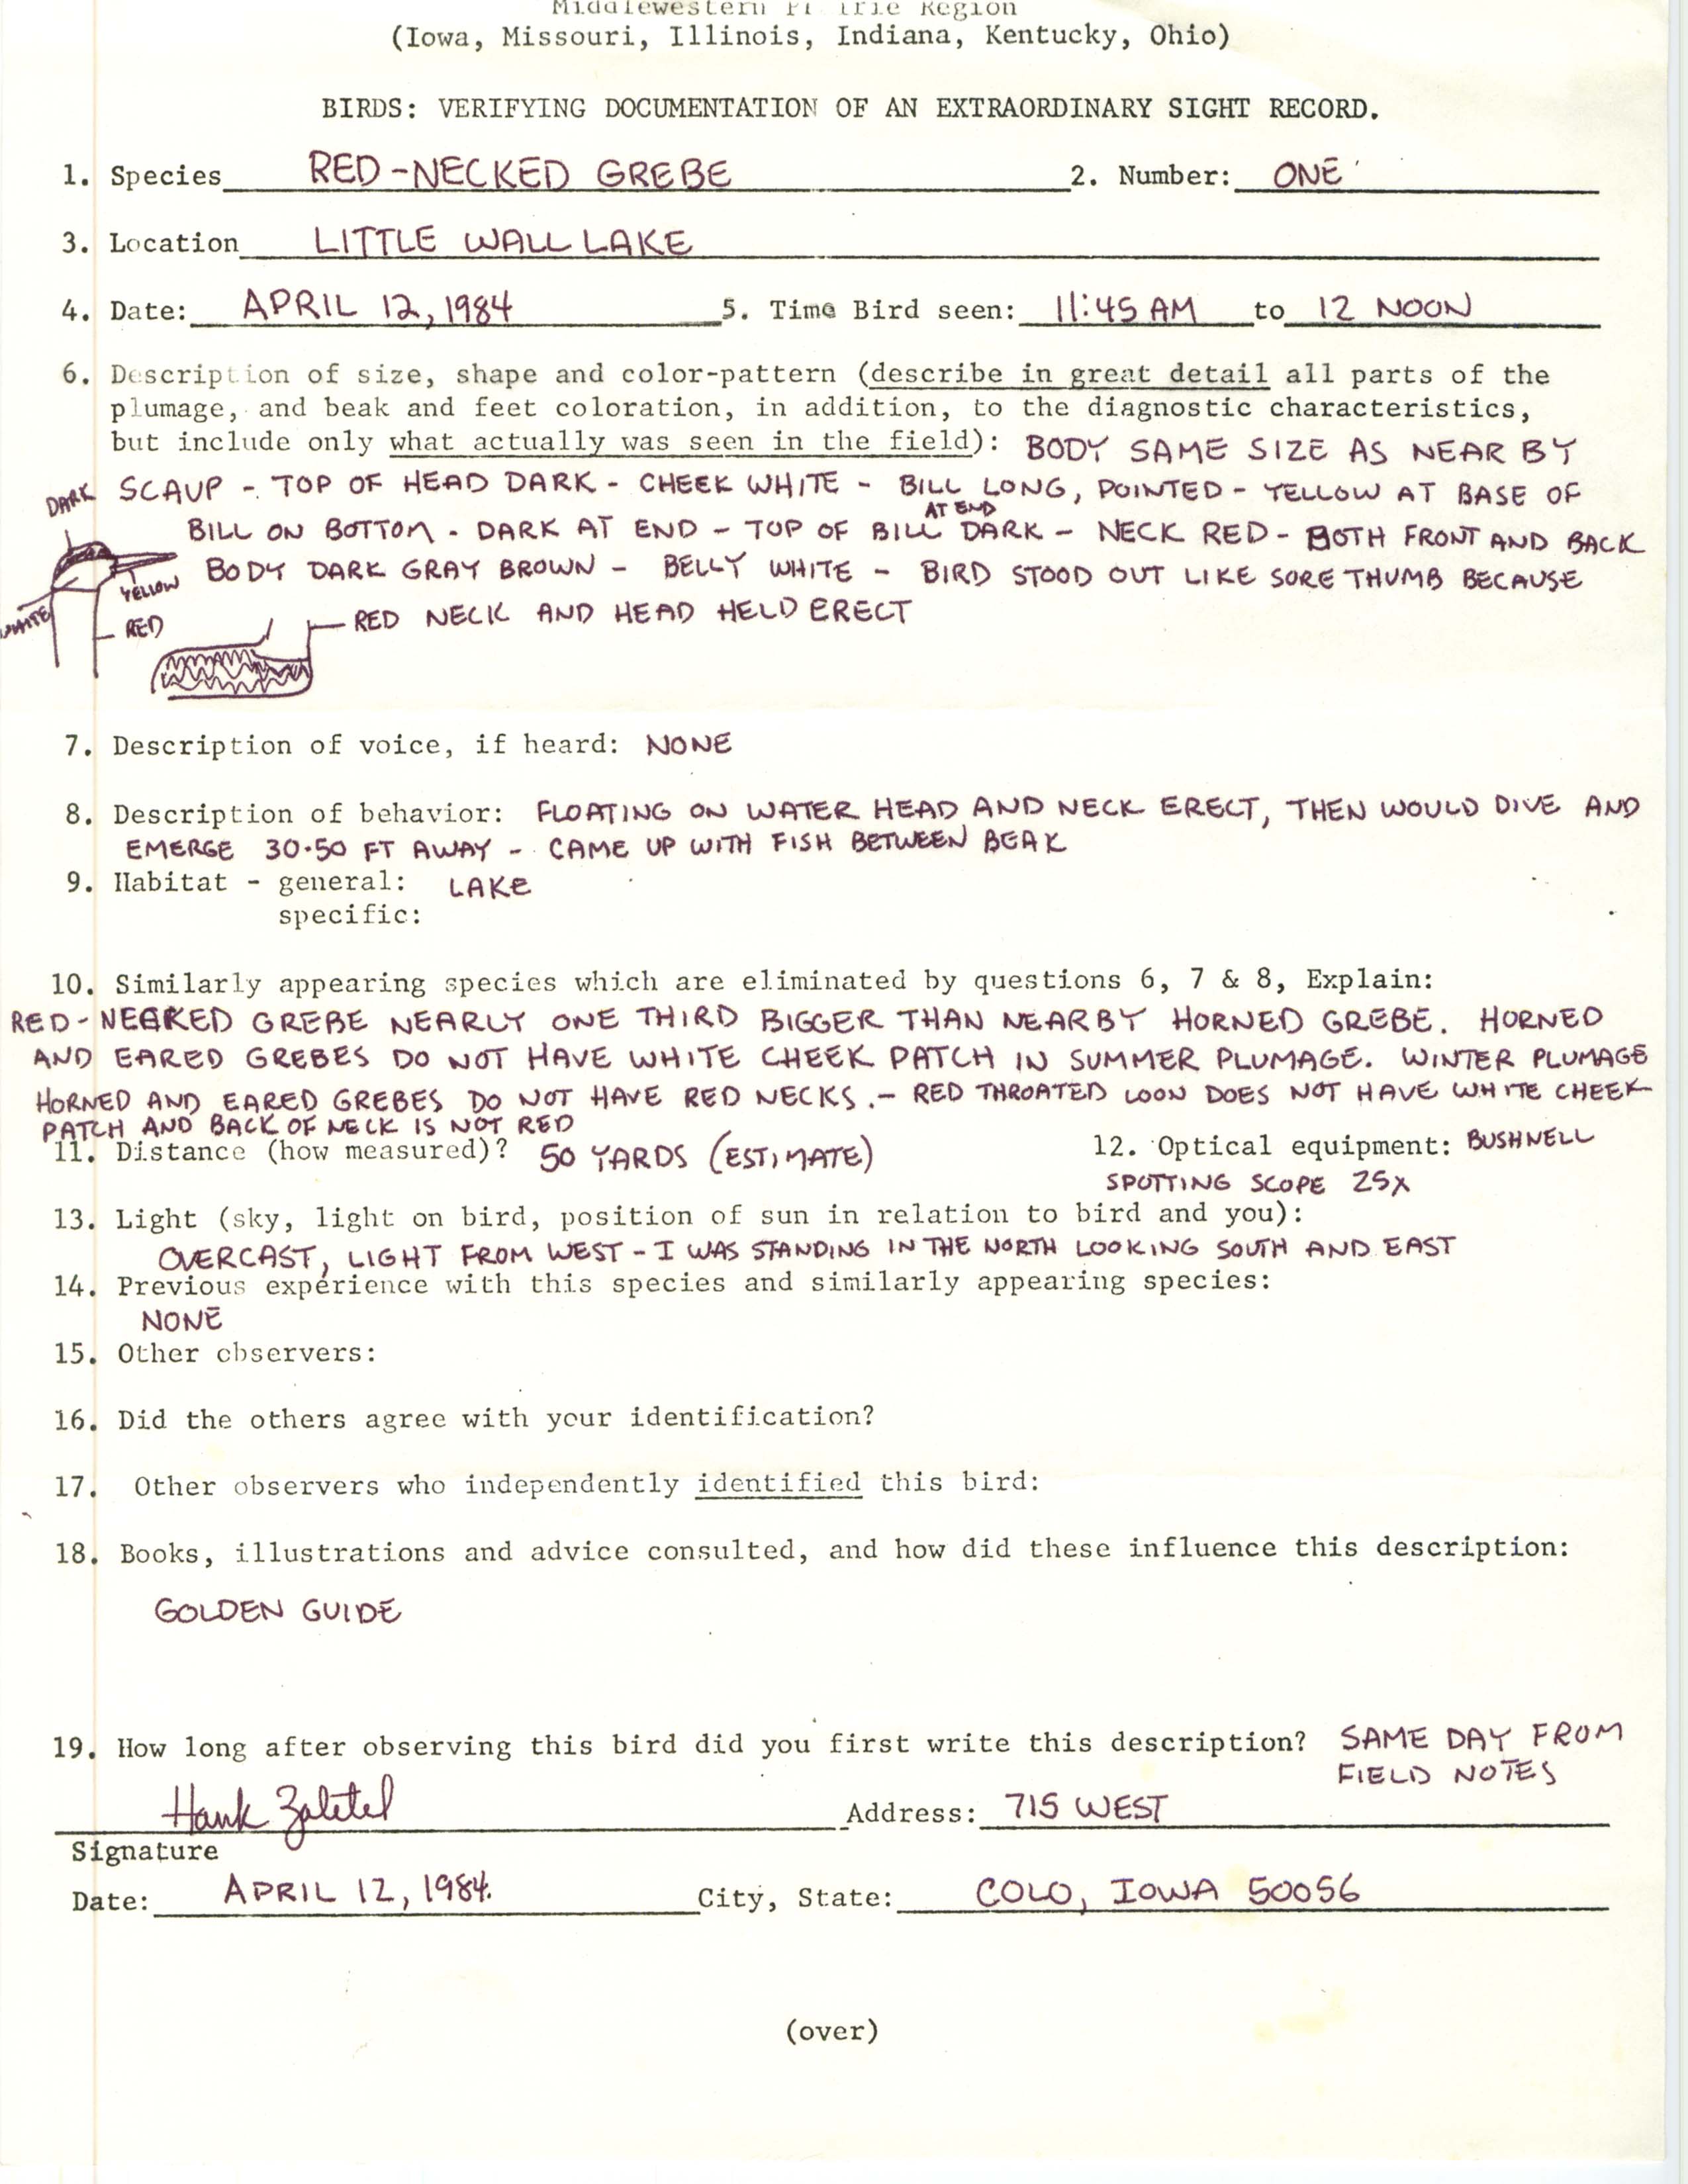 Rare bird documentation form for Red-necked Grebe at Little Wall Lake, 1984